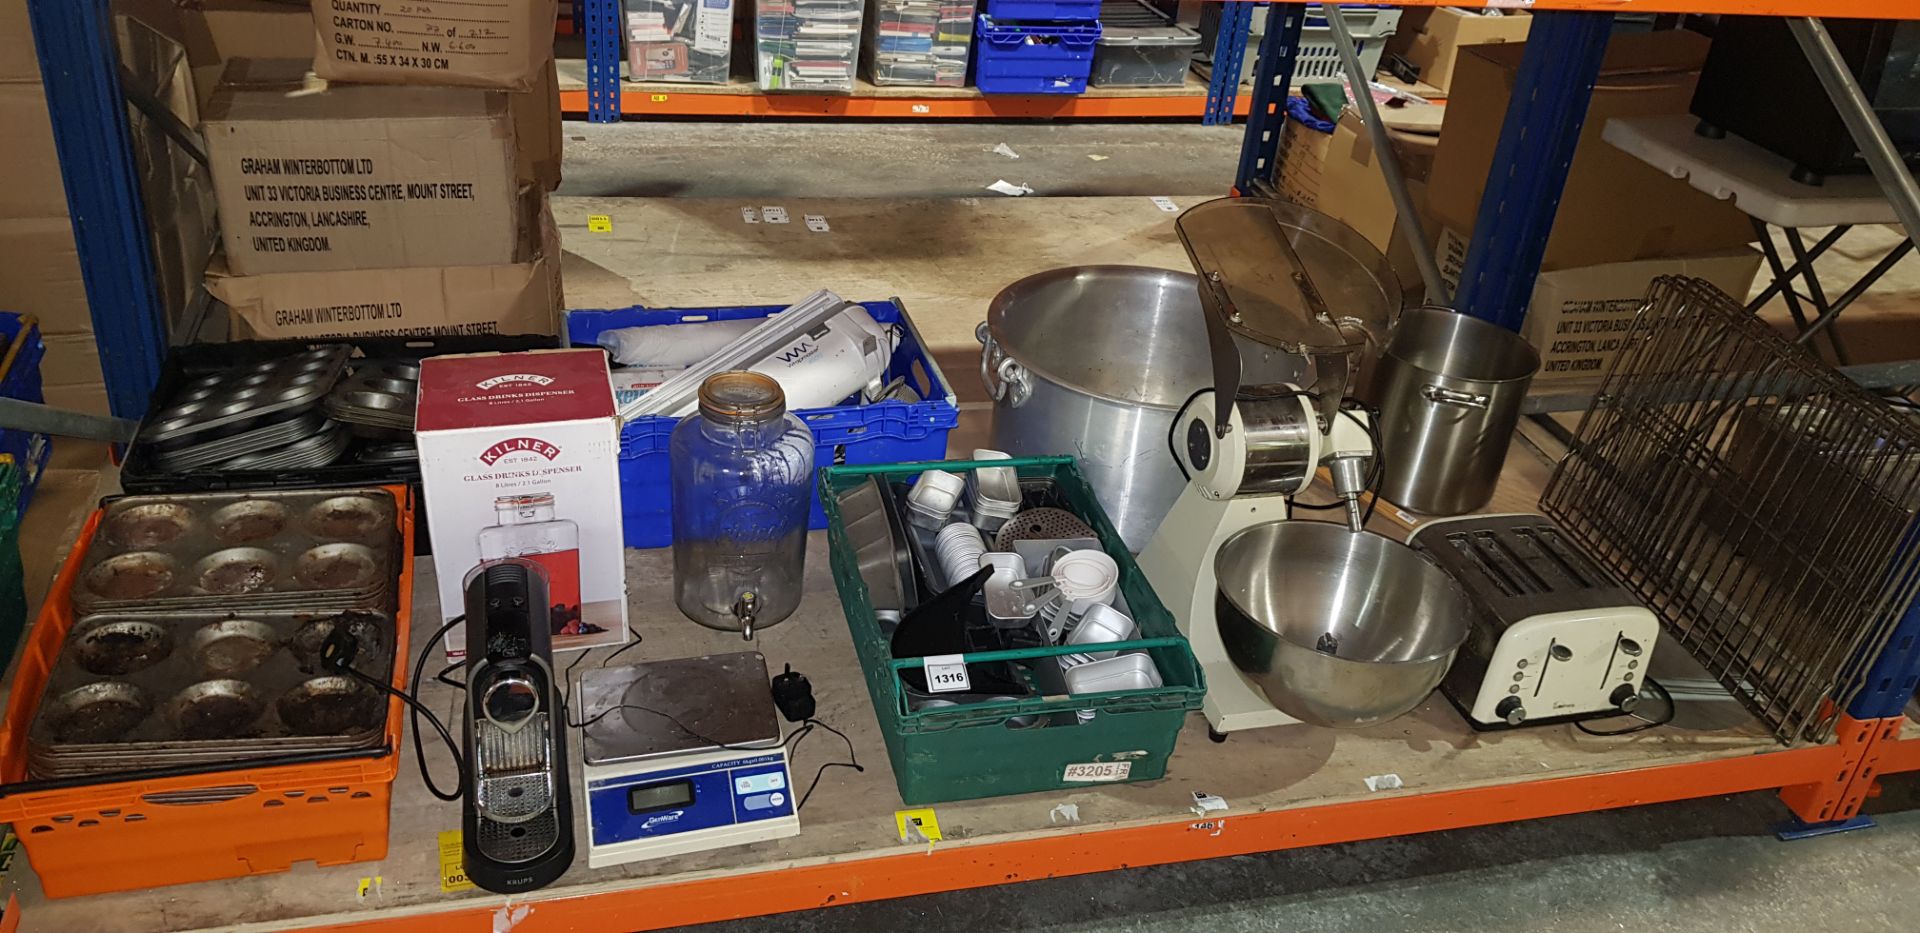 FULL BAY MIXED LOT TO INCLUDE PLANETARY MIXER - 2X LARGE STAINLESS STEEL BOWL/PAN WITH HANDLES -